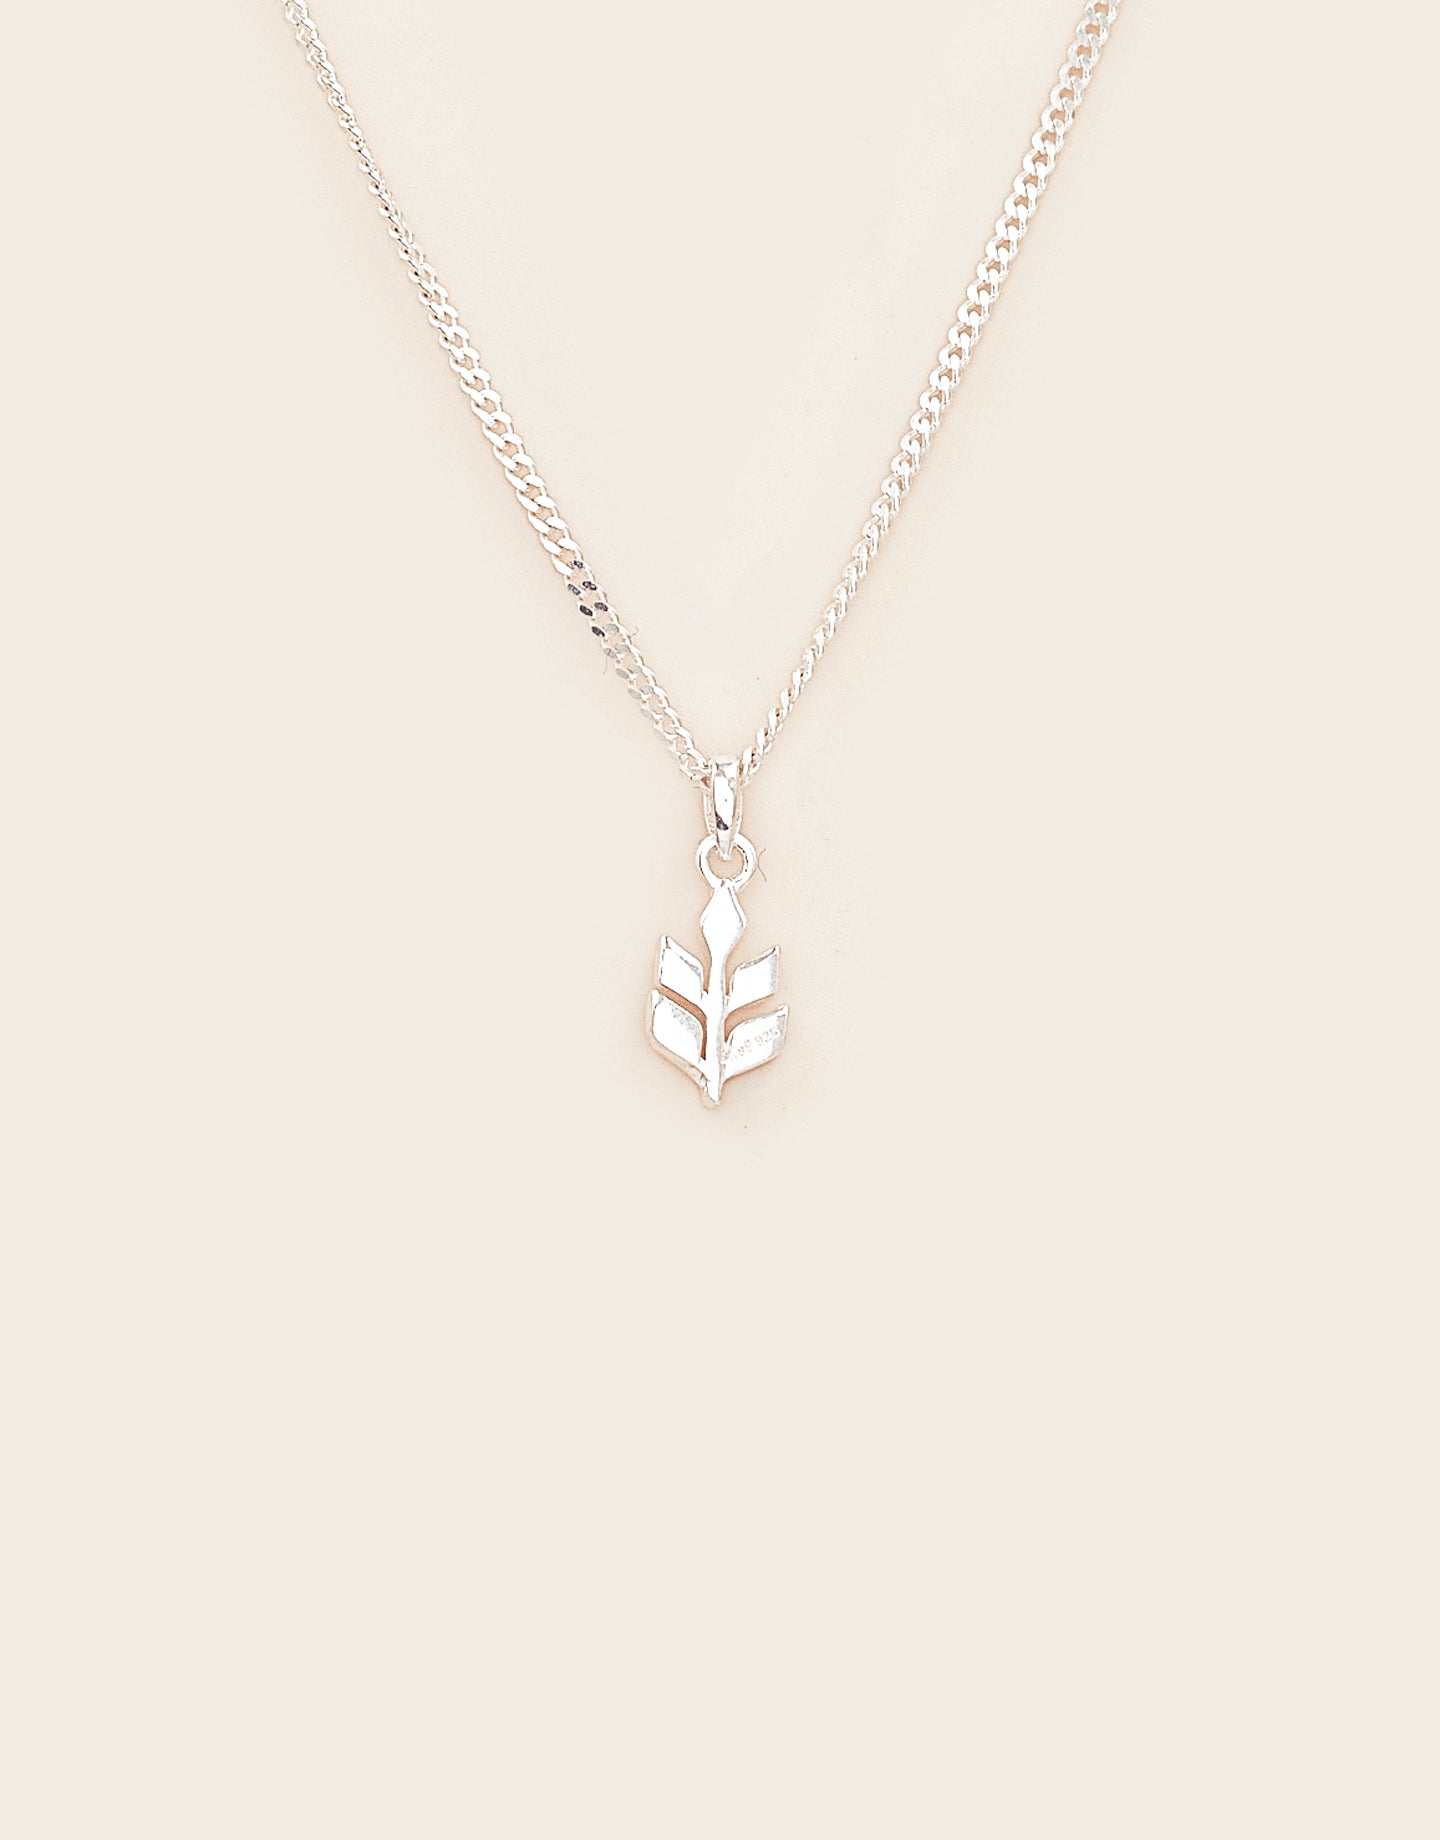 High Country wheat necklace